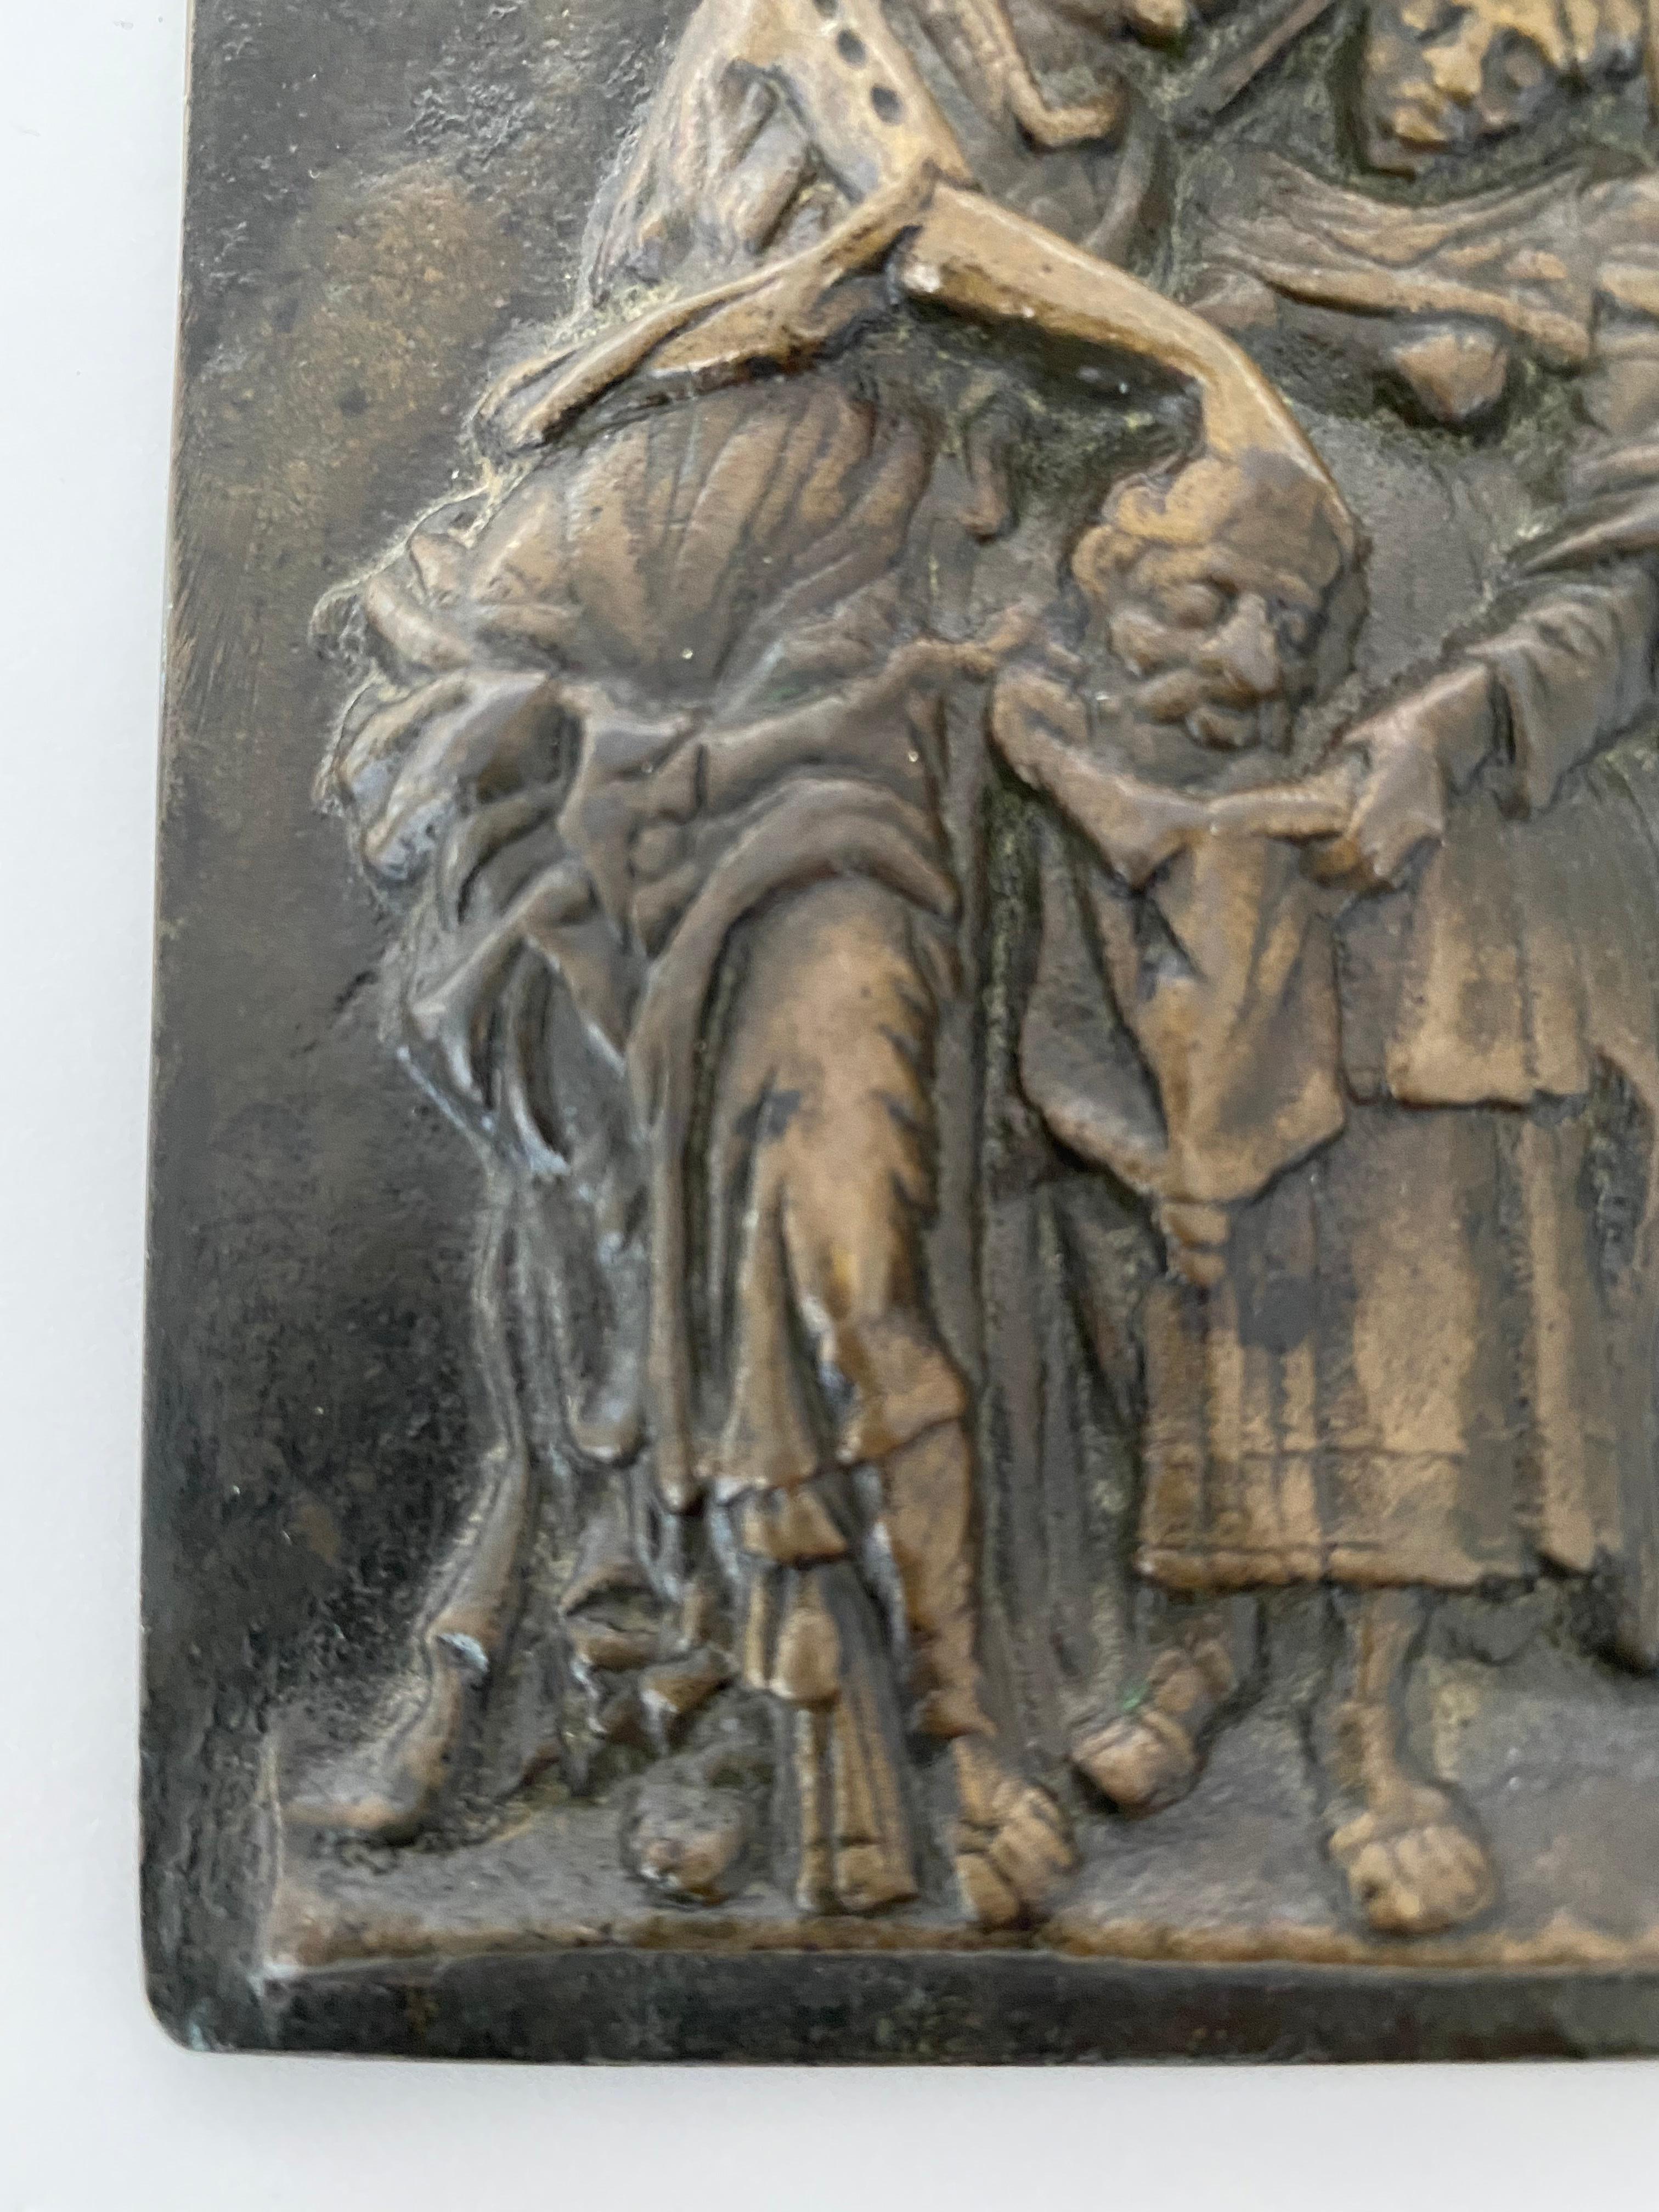 Judith with the head of Holofernes, unsigned rectangular cast bronze plaquette, by Andrea Briosco, called Riccio (1470-1532), Judith standing at left, her leg forward leans with head of Holofernes to place it in a sack held open by her servant